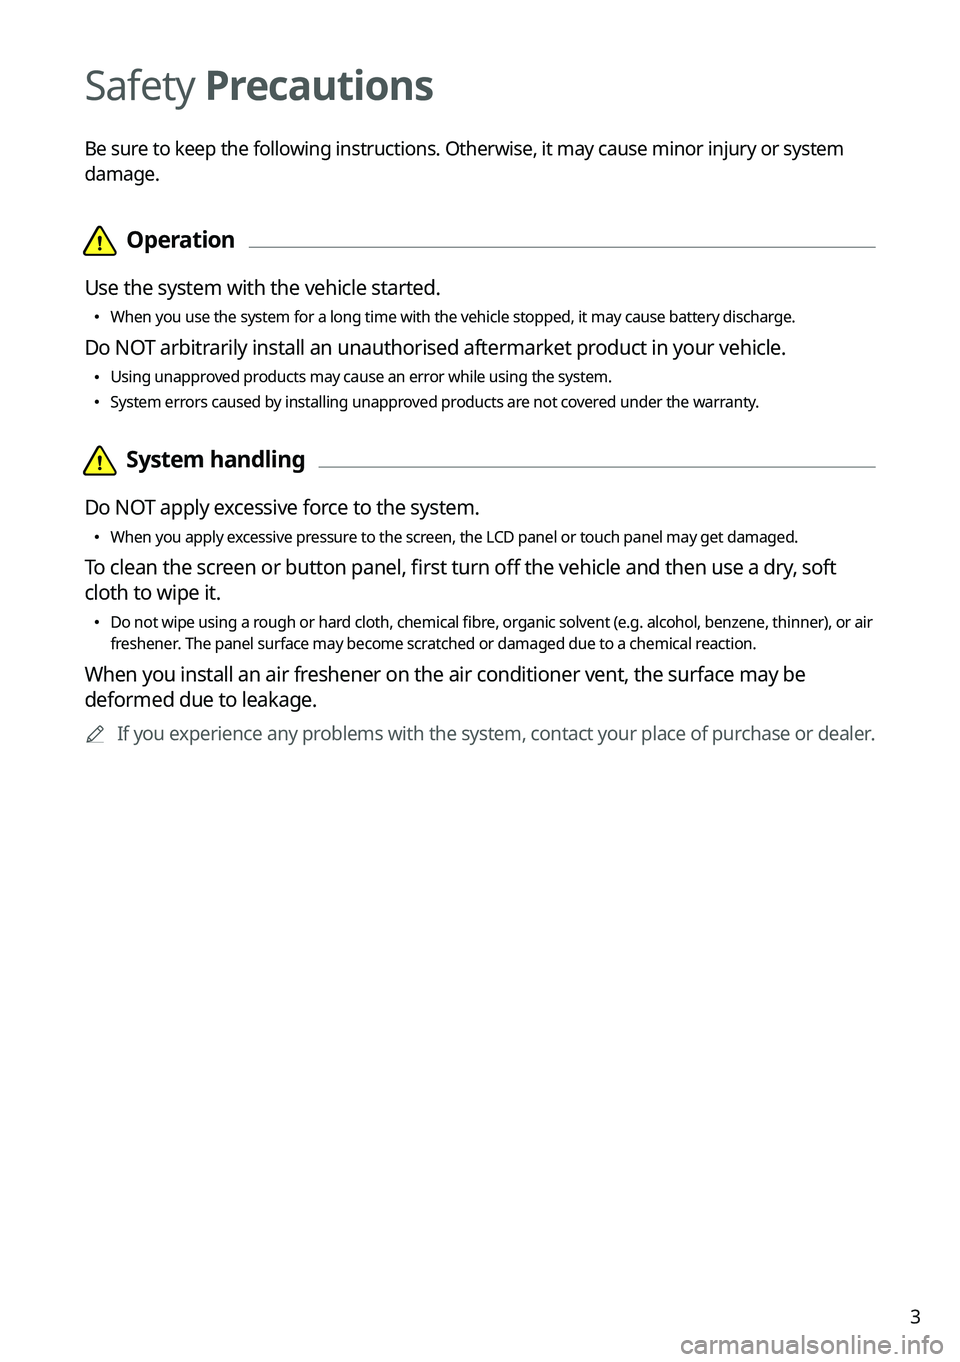 KIA FORTE 2023  Navigation System Quick Reference Guide 3
Safety Precautions
Be sure to keep the following instructions. Otherwise, it may cause minor injury or system 
damage. 
  